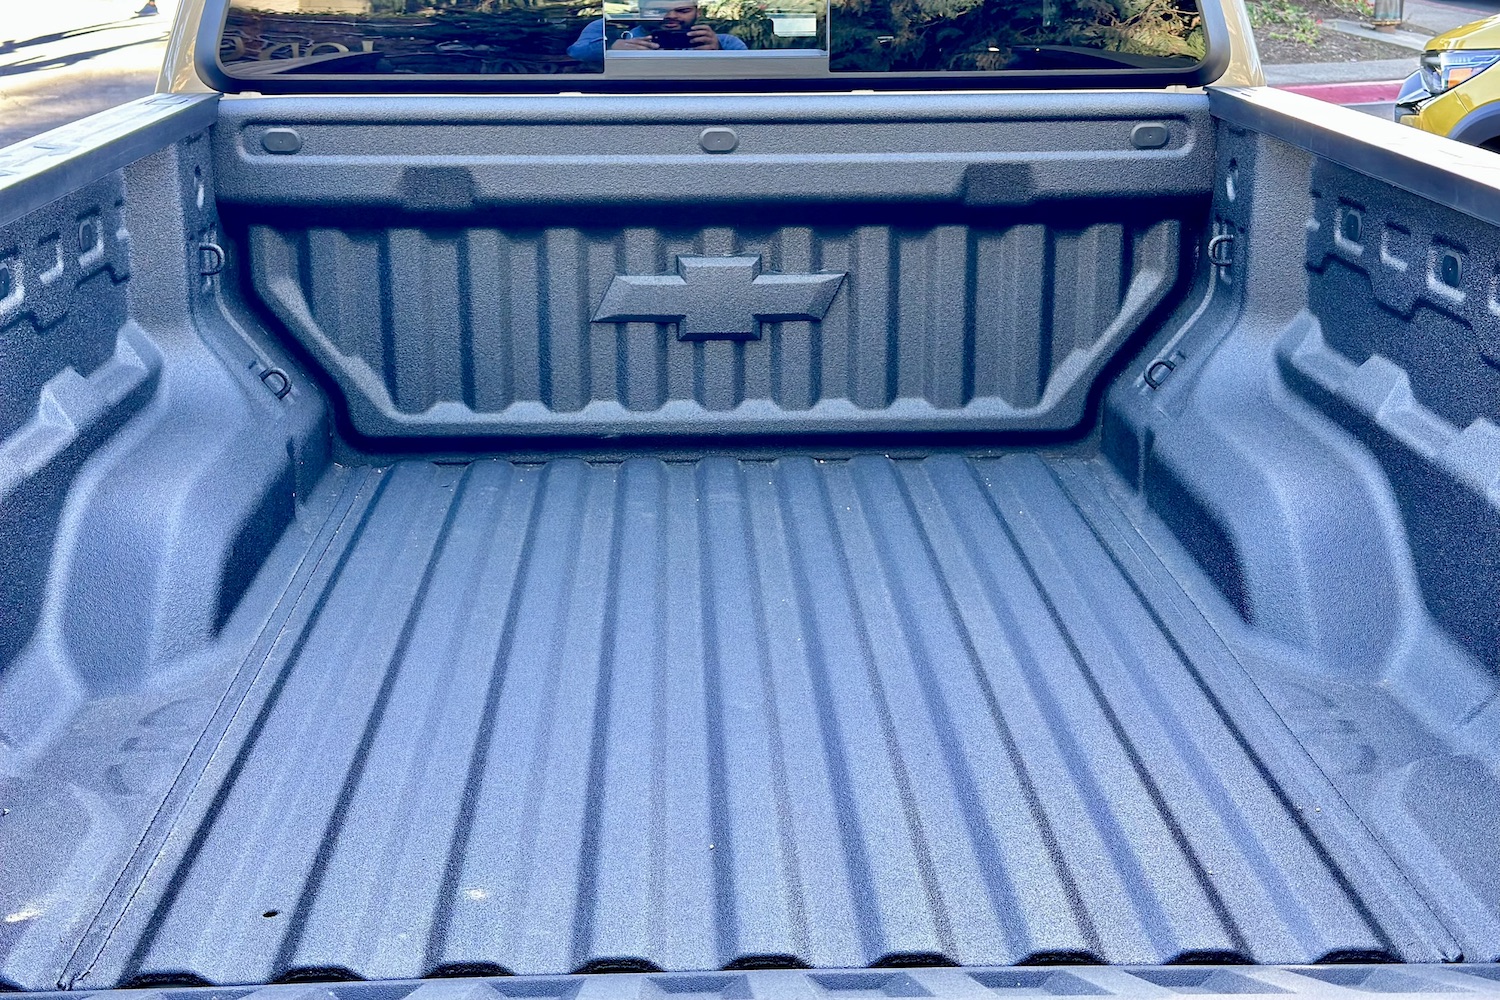 2023 Chevrolet Colorado Trail Boss close up of the ridges in the bed.